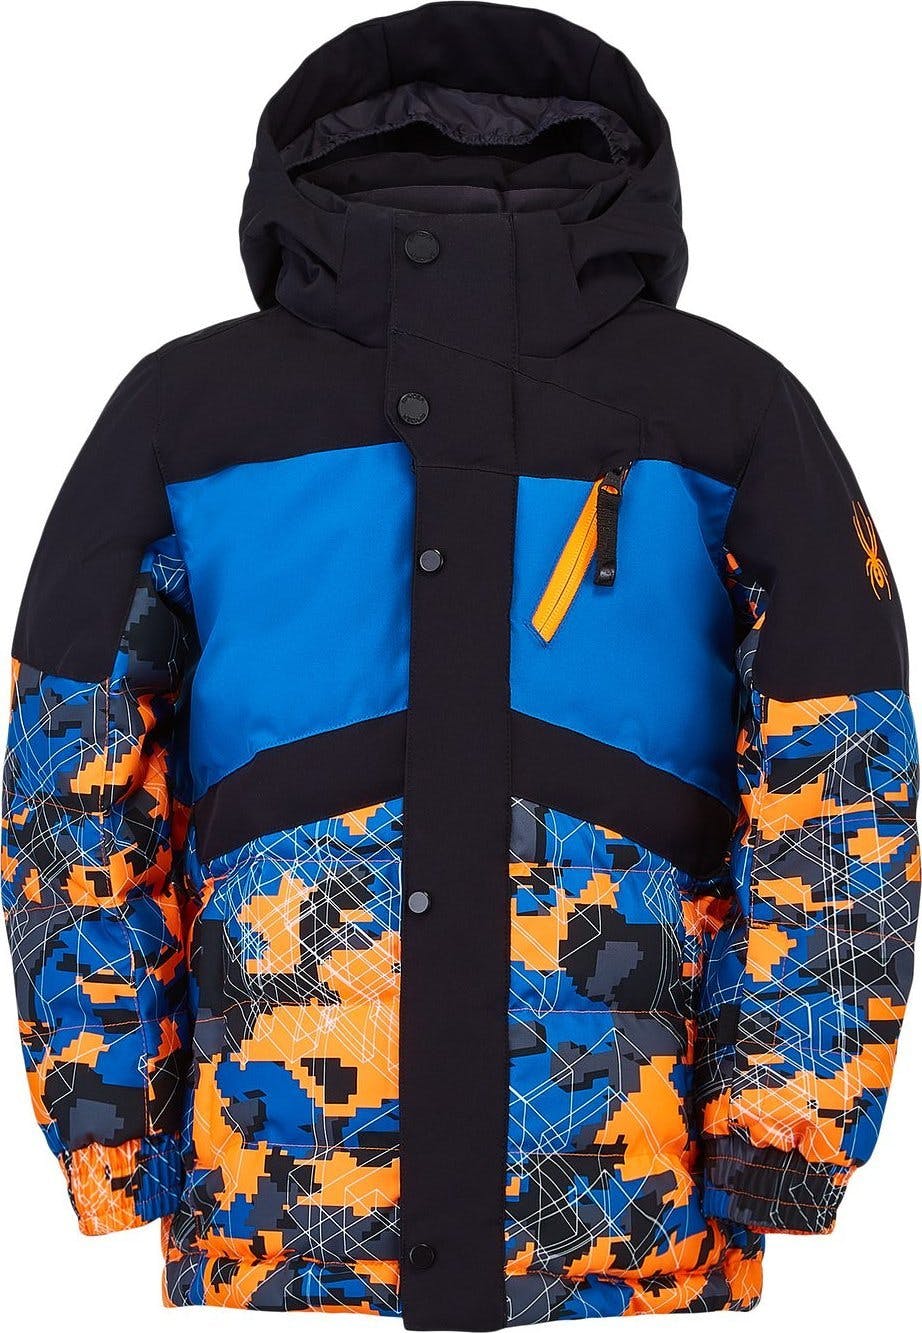 Product image for Mini Trick Synthetic Jacket - Boys